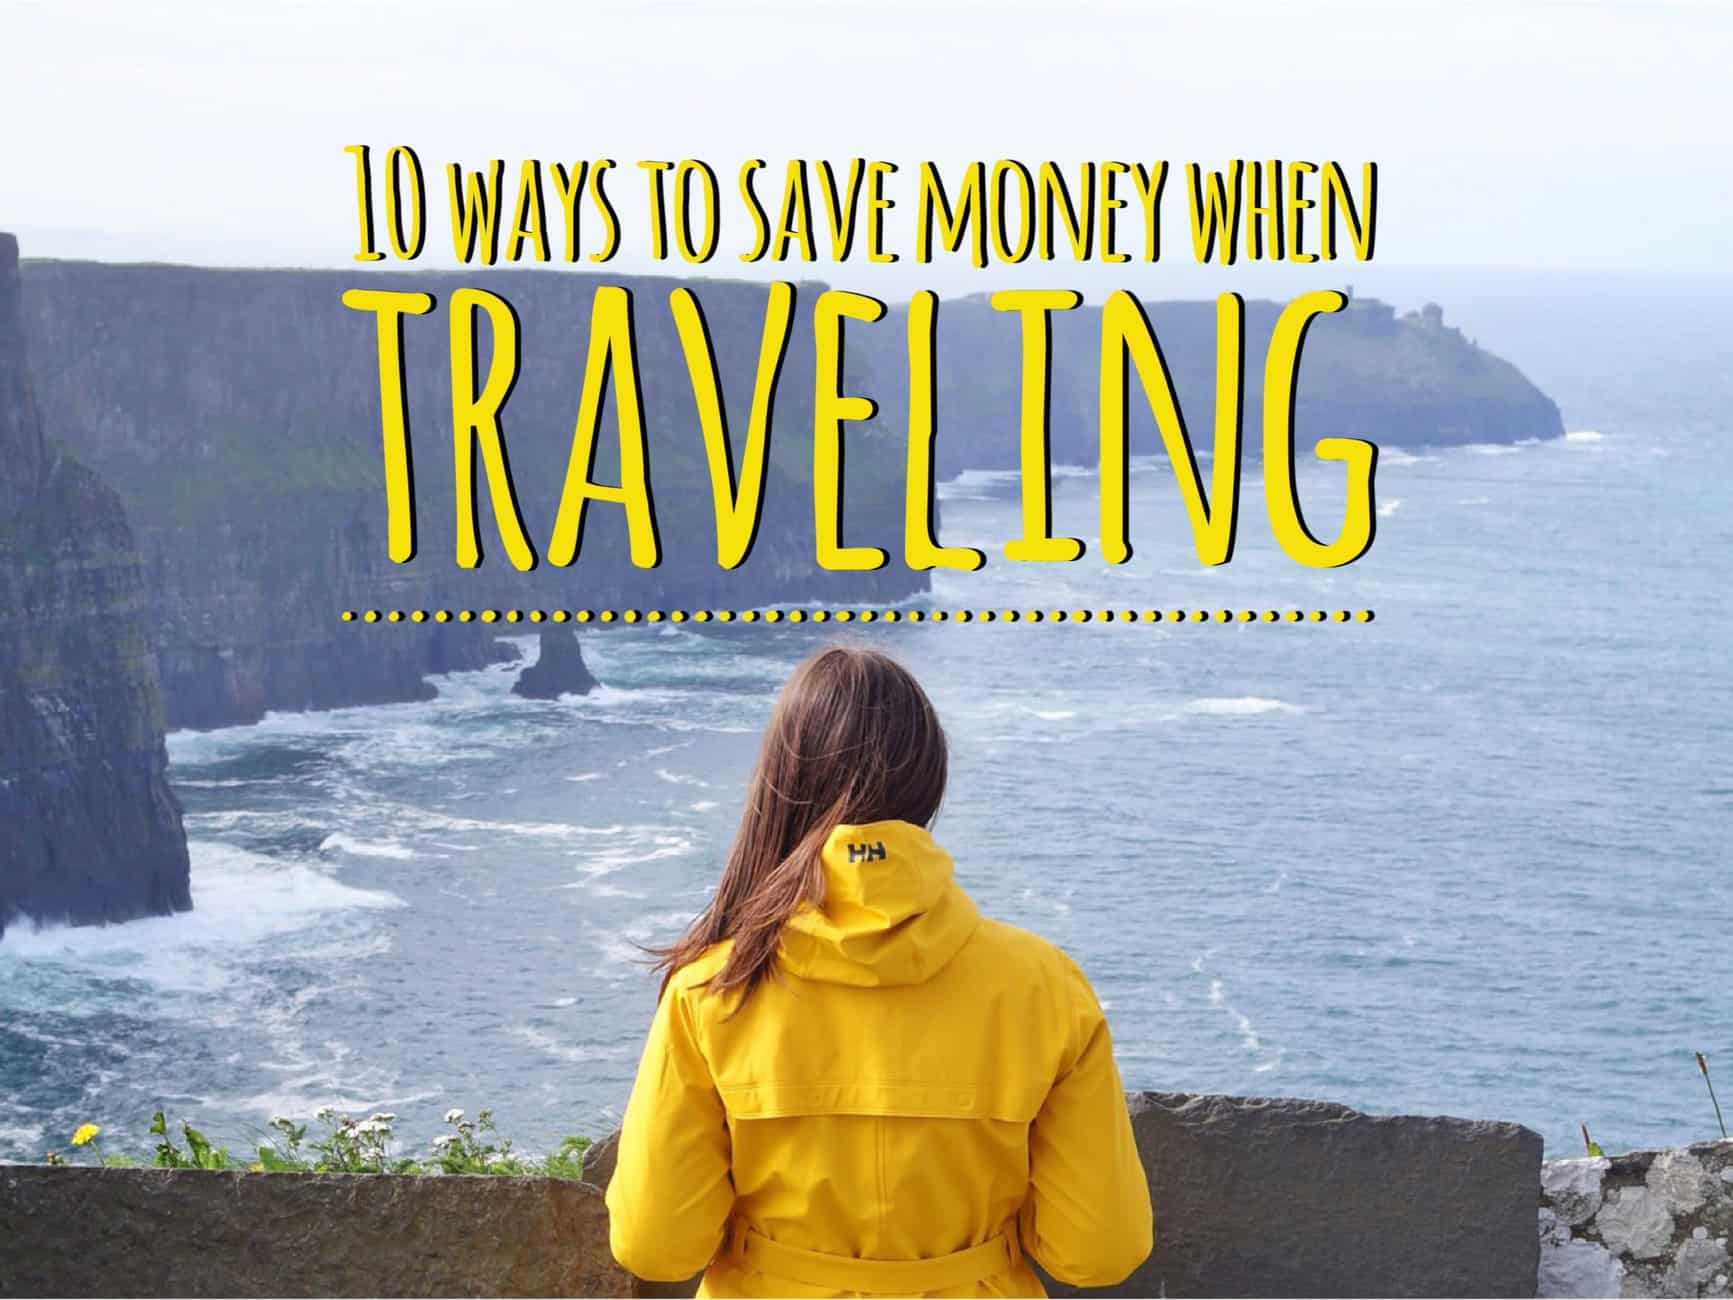 10 ways to save money when traveling